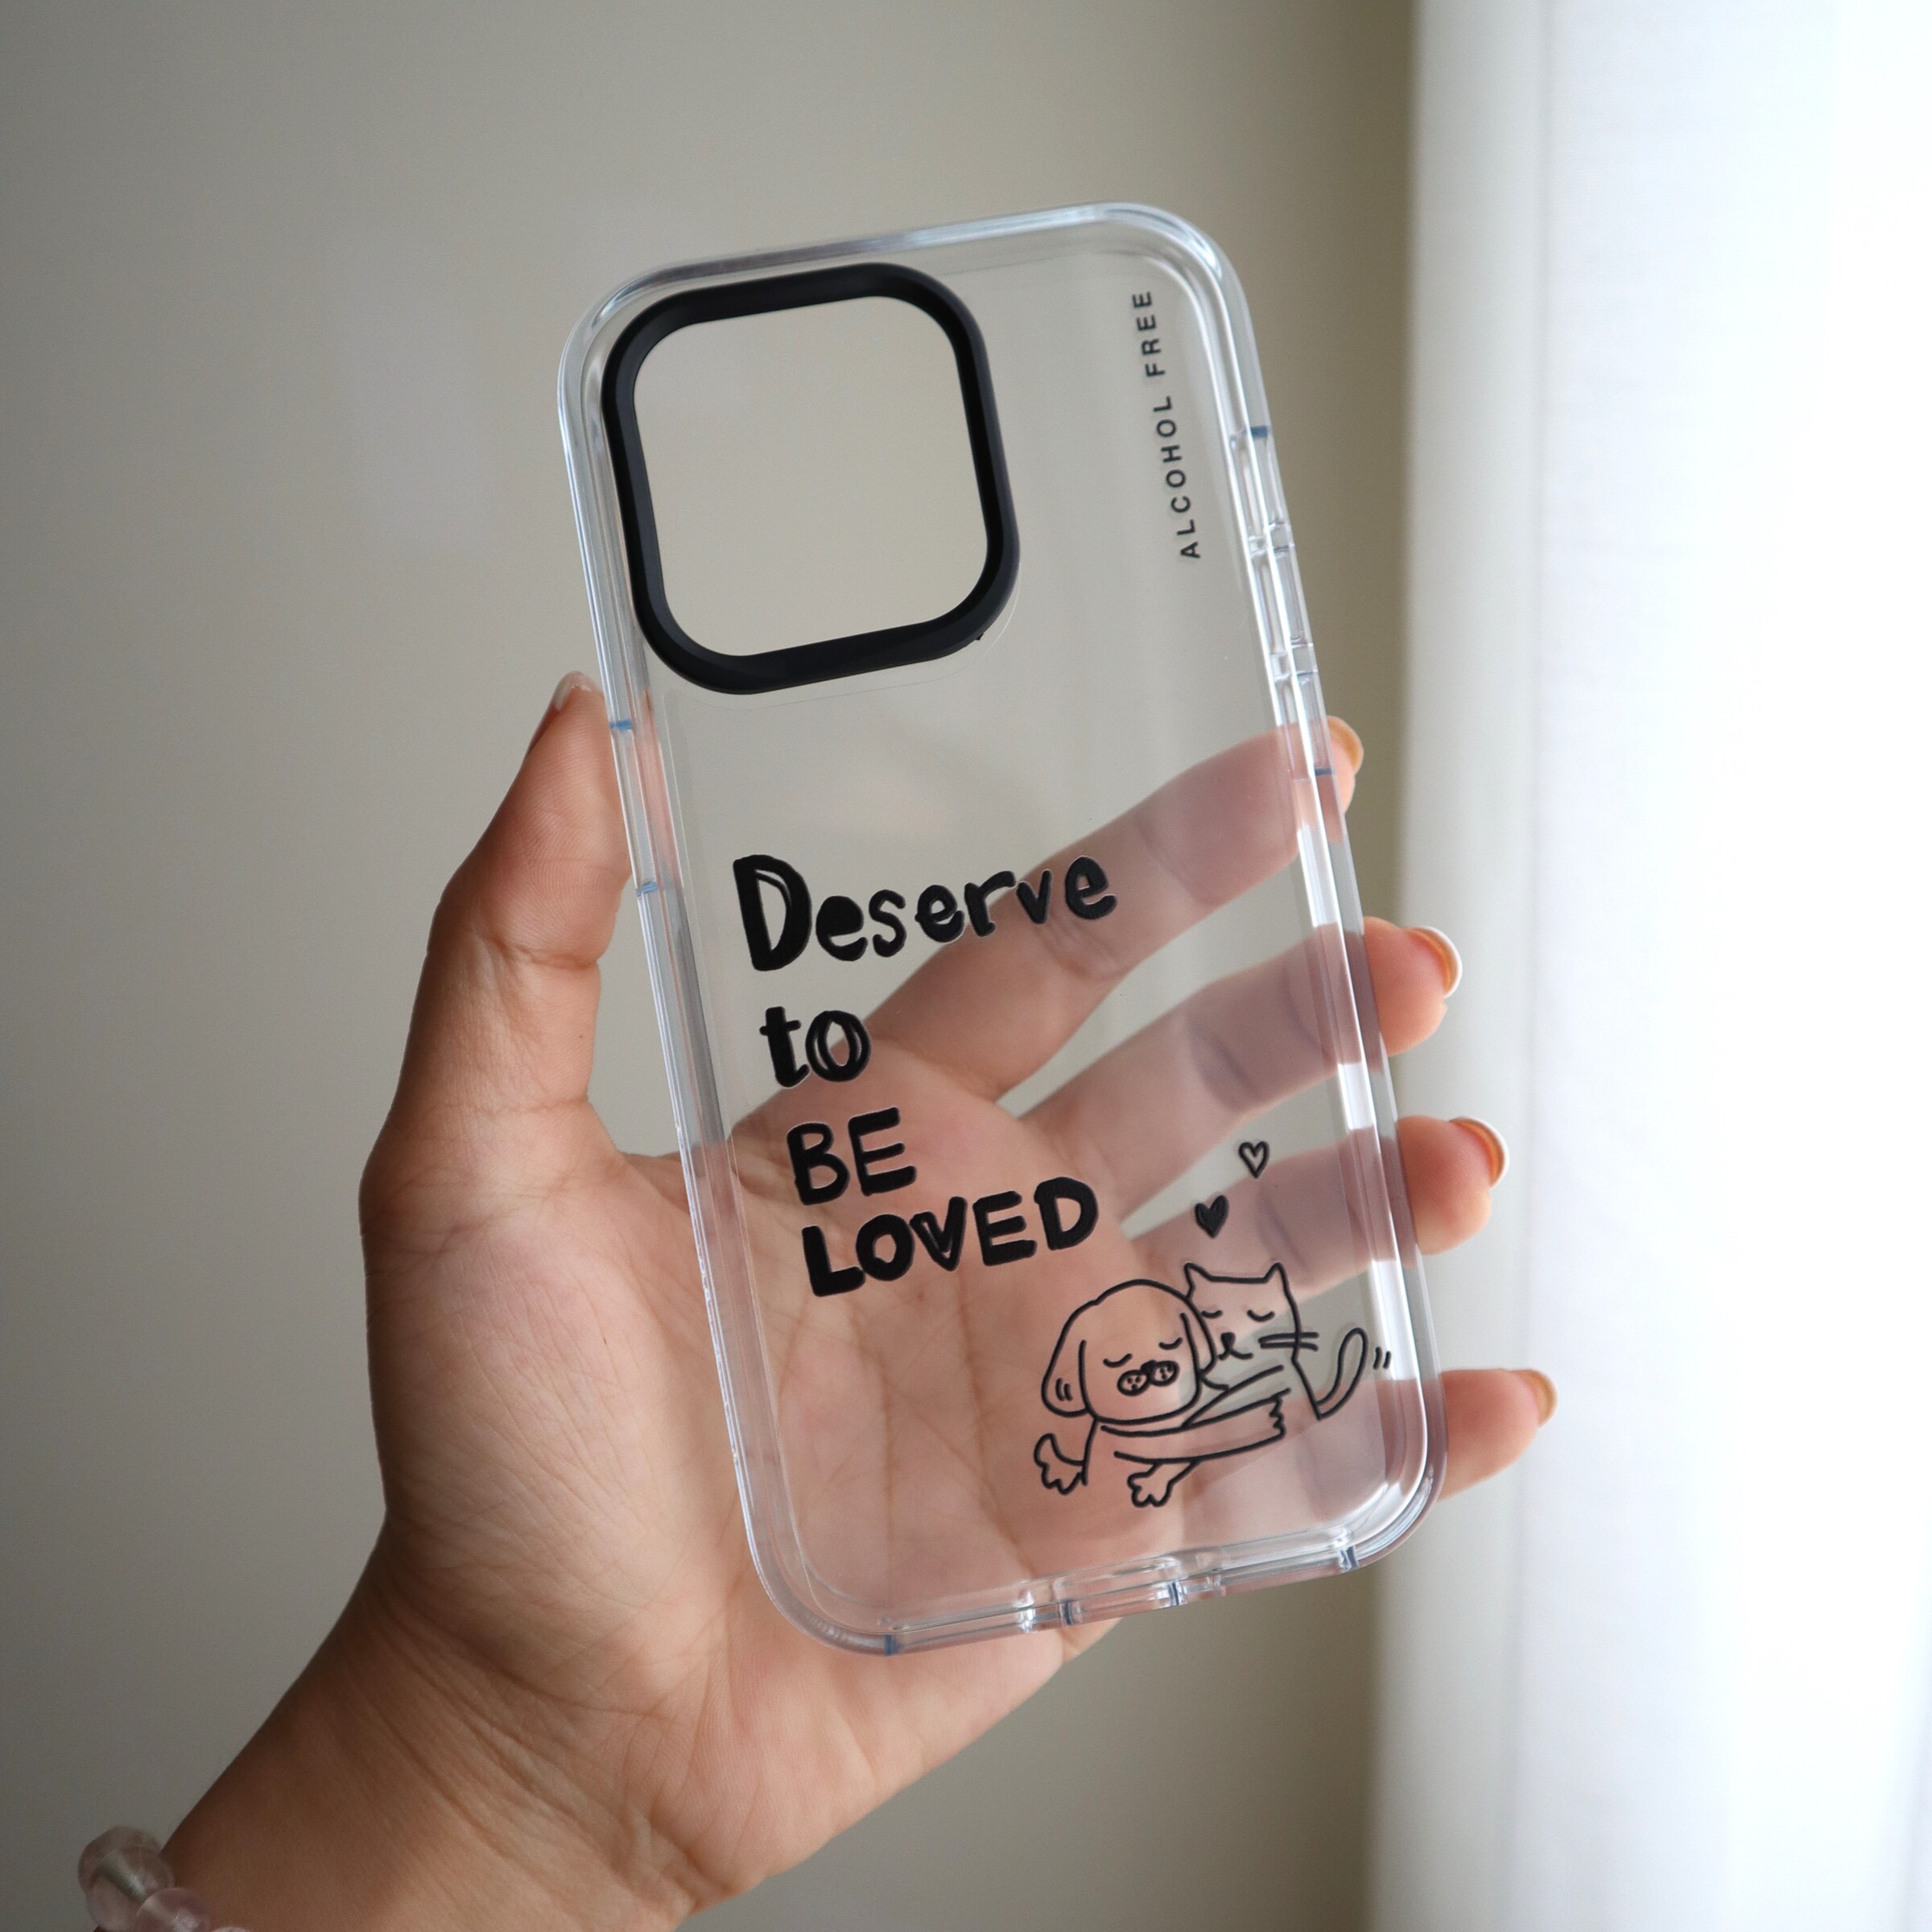 Deserve to be loved